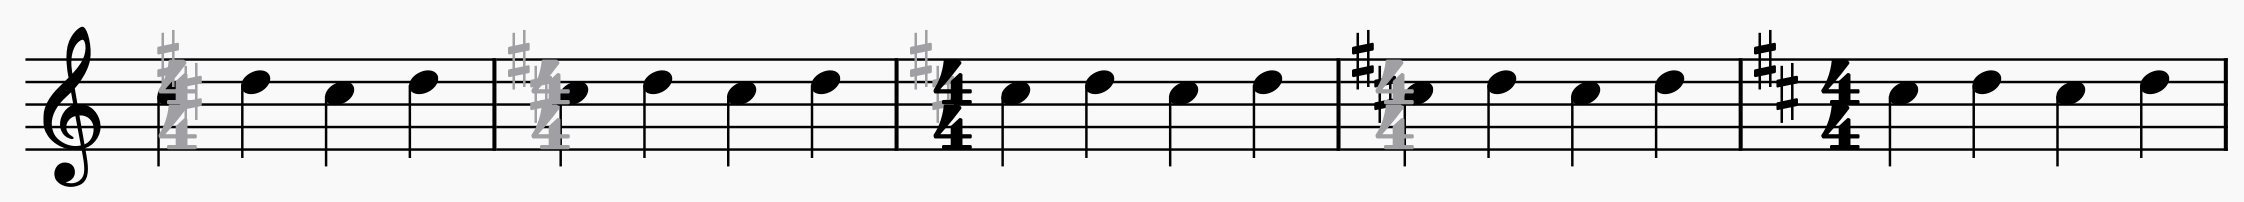 Invisible time signatures in MuseScore 3